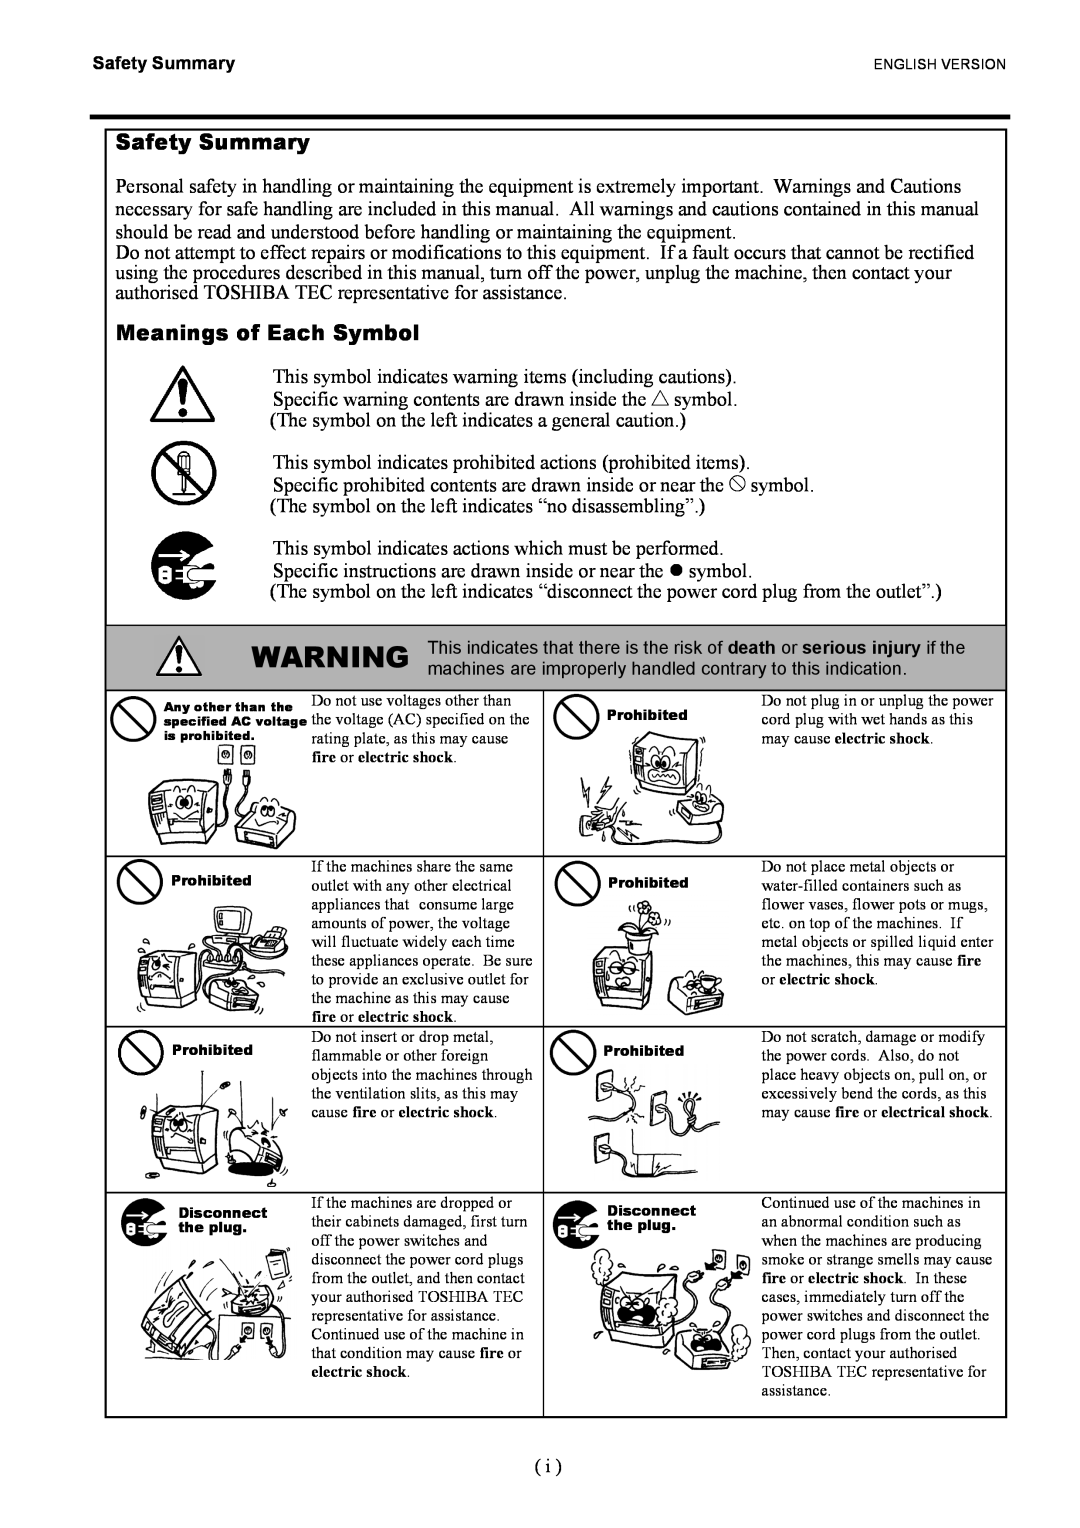 Toshiba B-EX4T1 manual Safety Summary, Meanings of Each Symbol 